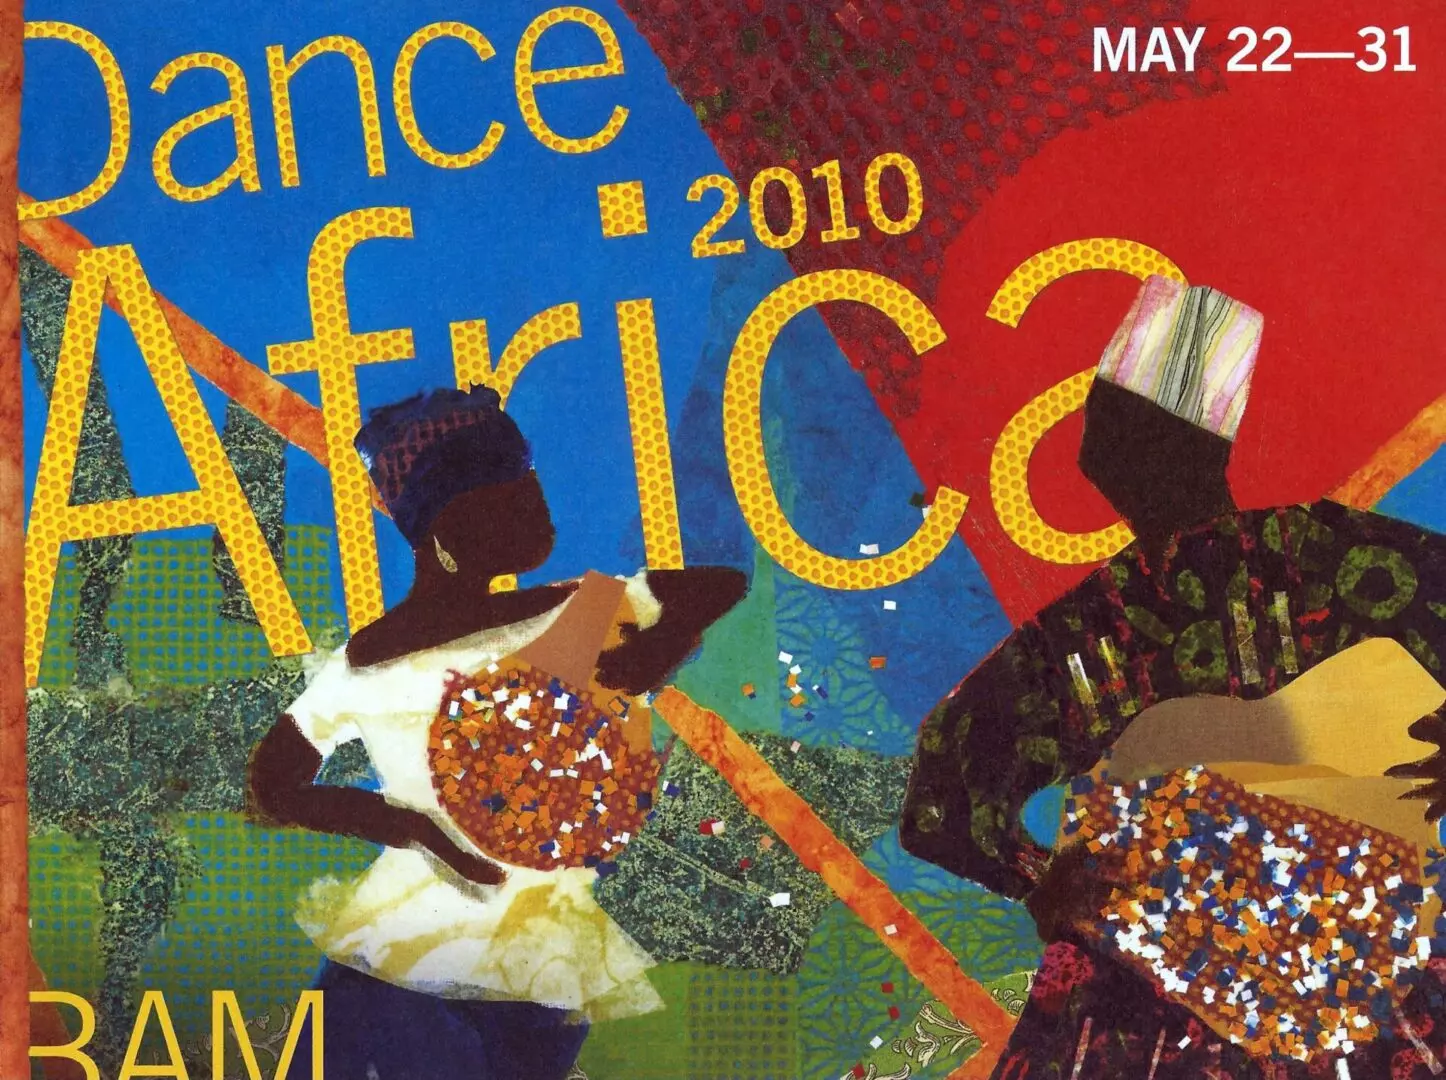 A painting of two women holding bowls in front of the words " dance africa 2 0 1 0."